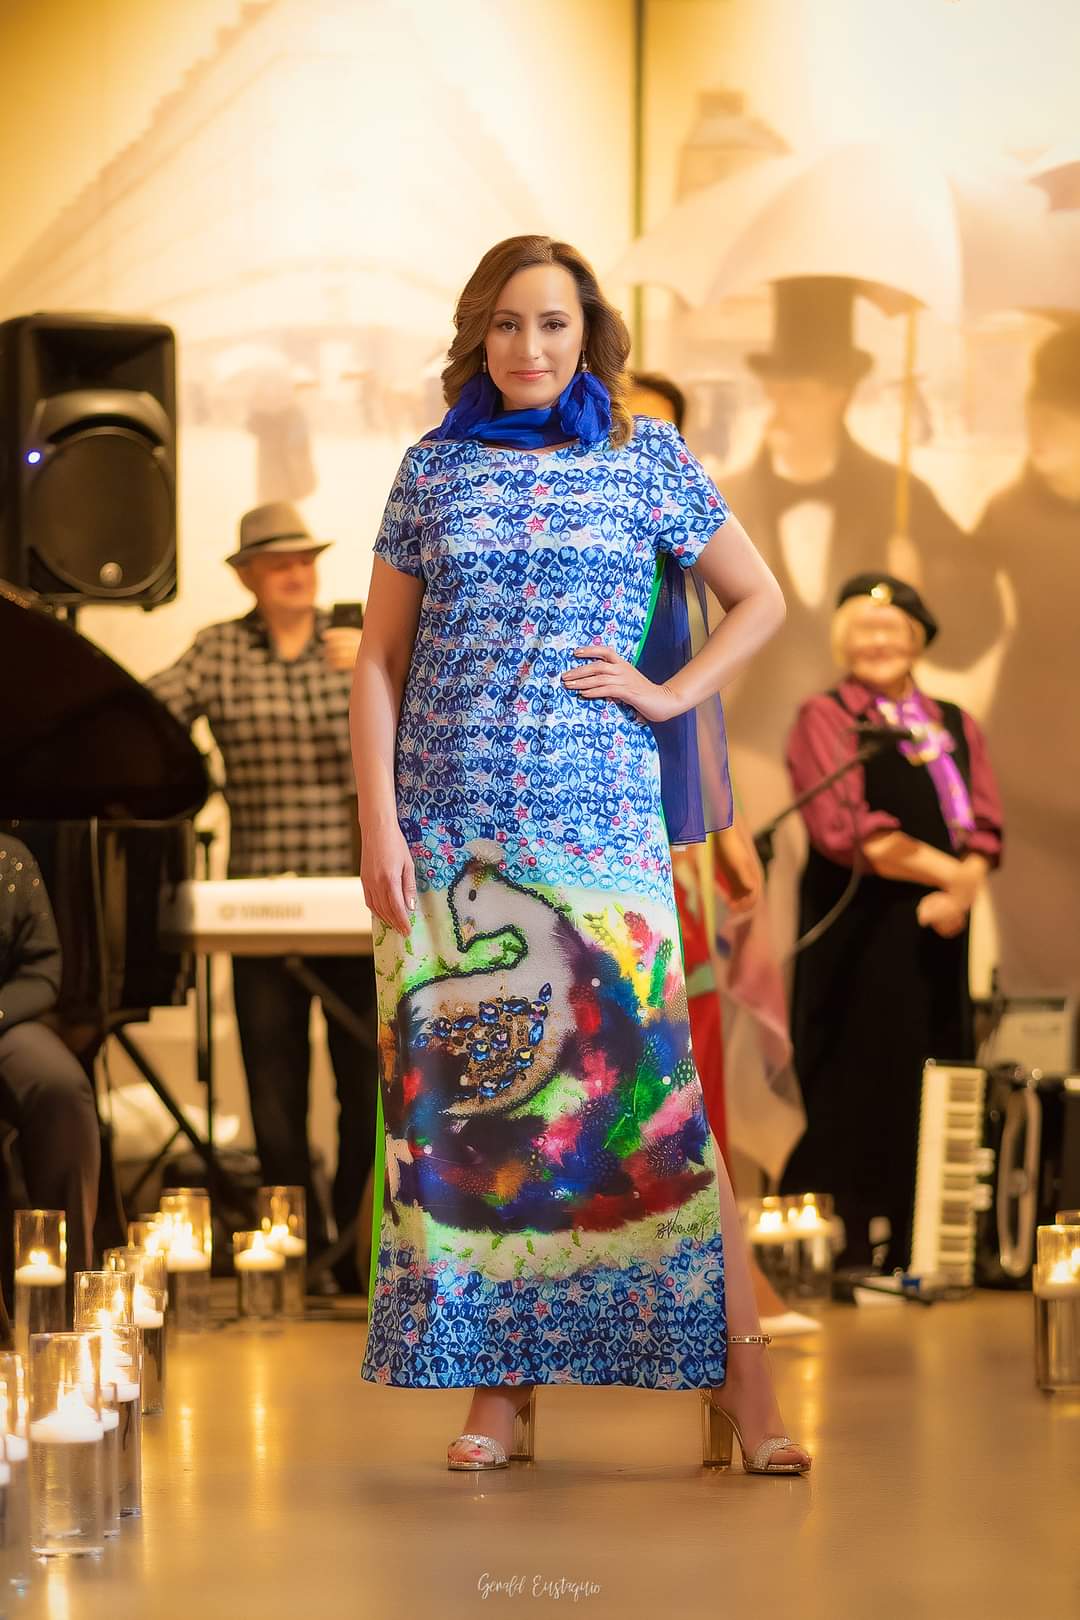 Summer Bright Maxi Dress With Sleeves Scoop NeckWearable Art BE HAPPY by artist Alesia Chaika Made In USA Featured at the Museum Of Contemporary Art Chicago in the charity runway fashion show and artworks exhibition